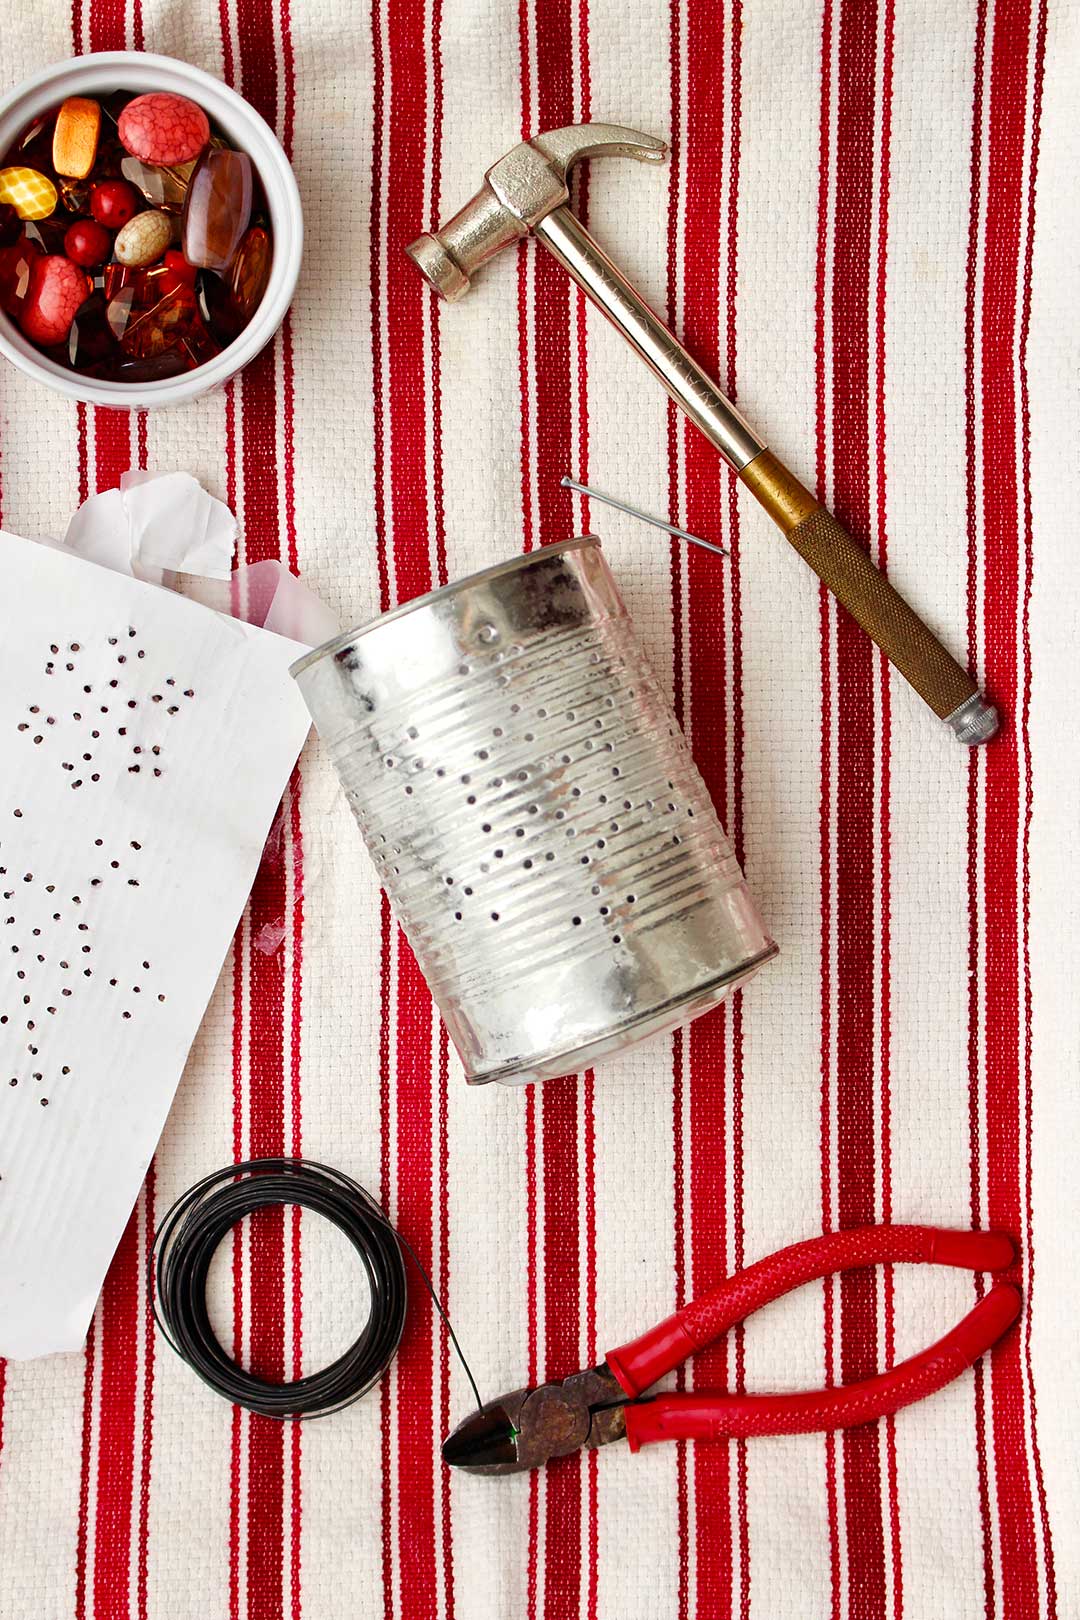 Tin can punched through with snowflake design with beads, hammer, wire and wire cutters near by.